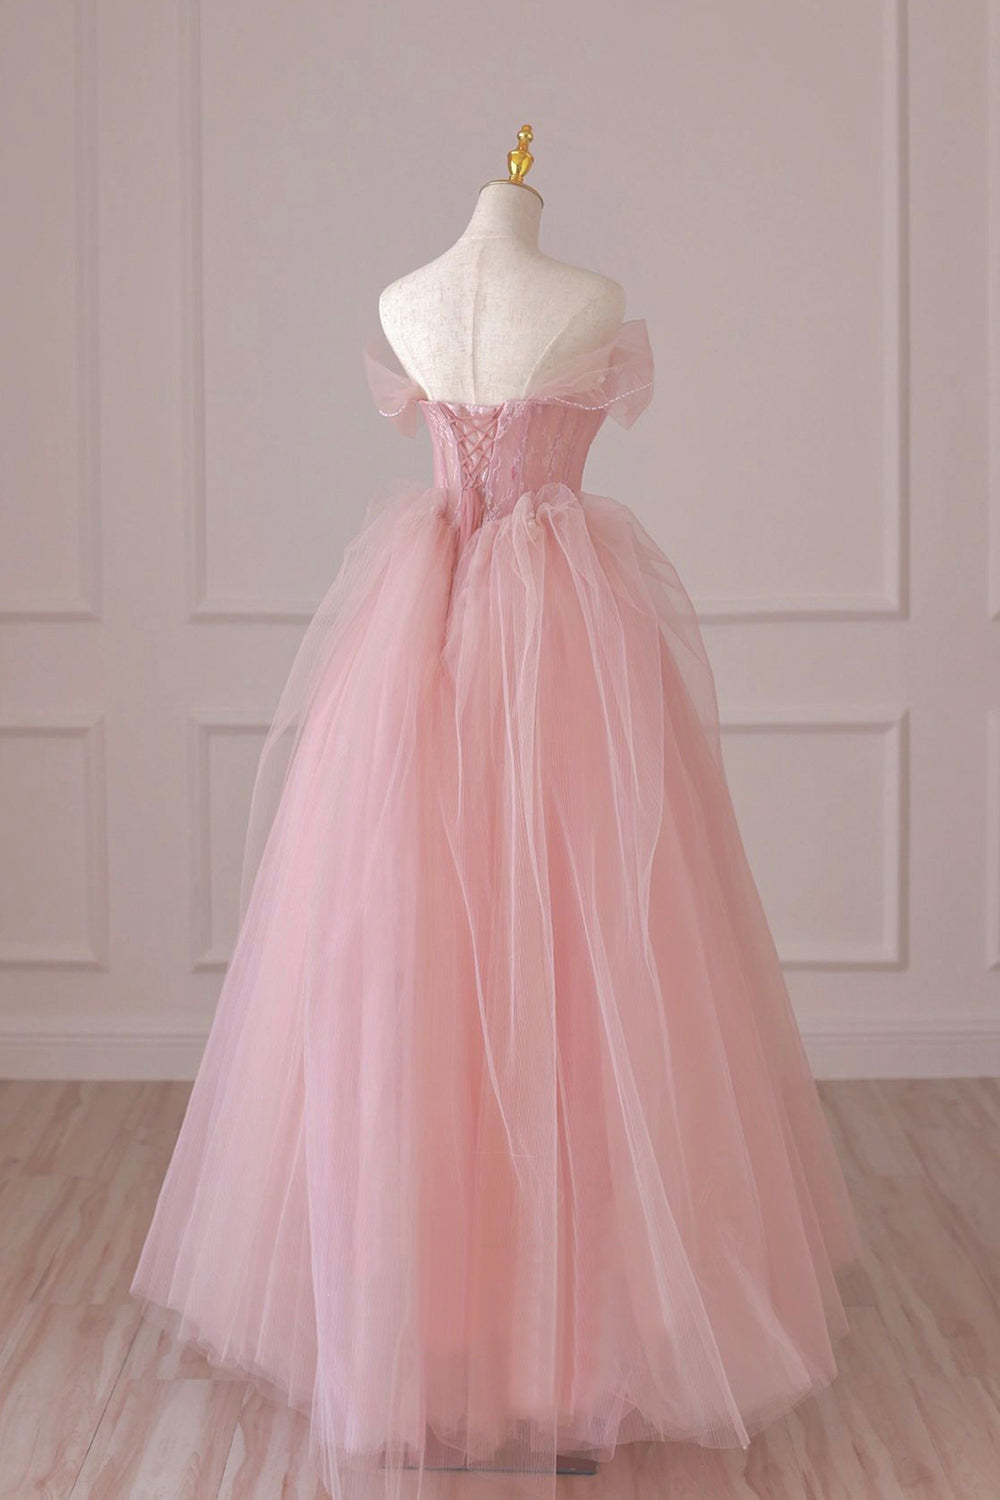 Bridesmaid Dresses For Winter Wedding, Pink Tulle Lace Long Formal Dress, A-Line Off Shoulder Pink Prom Dress